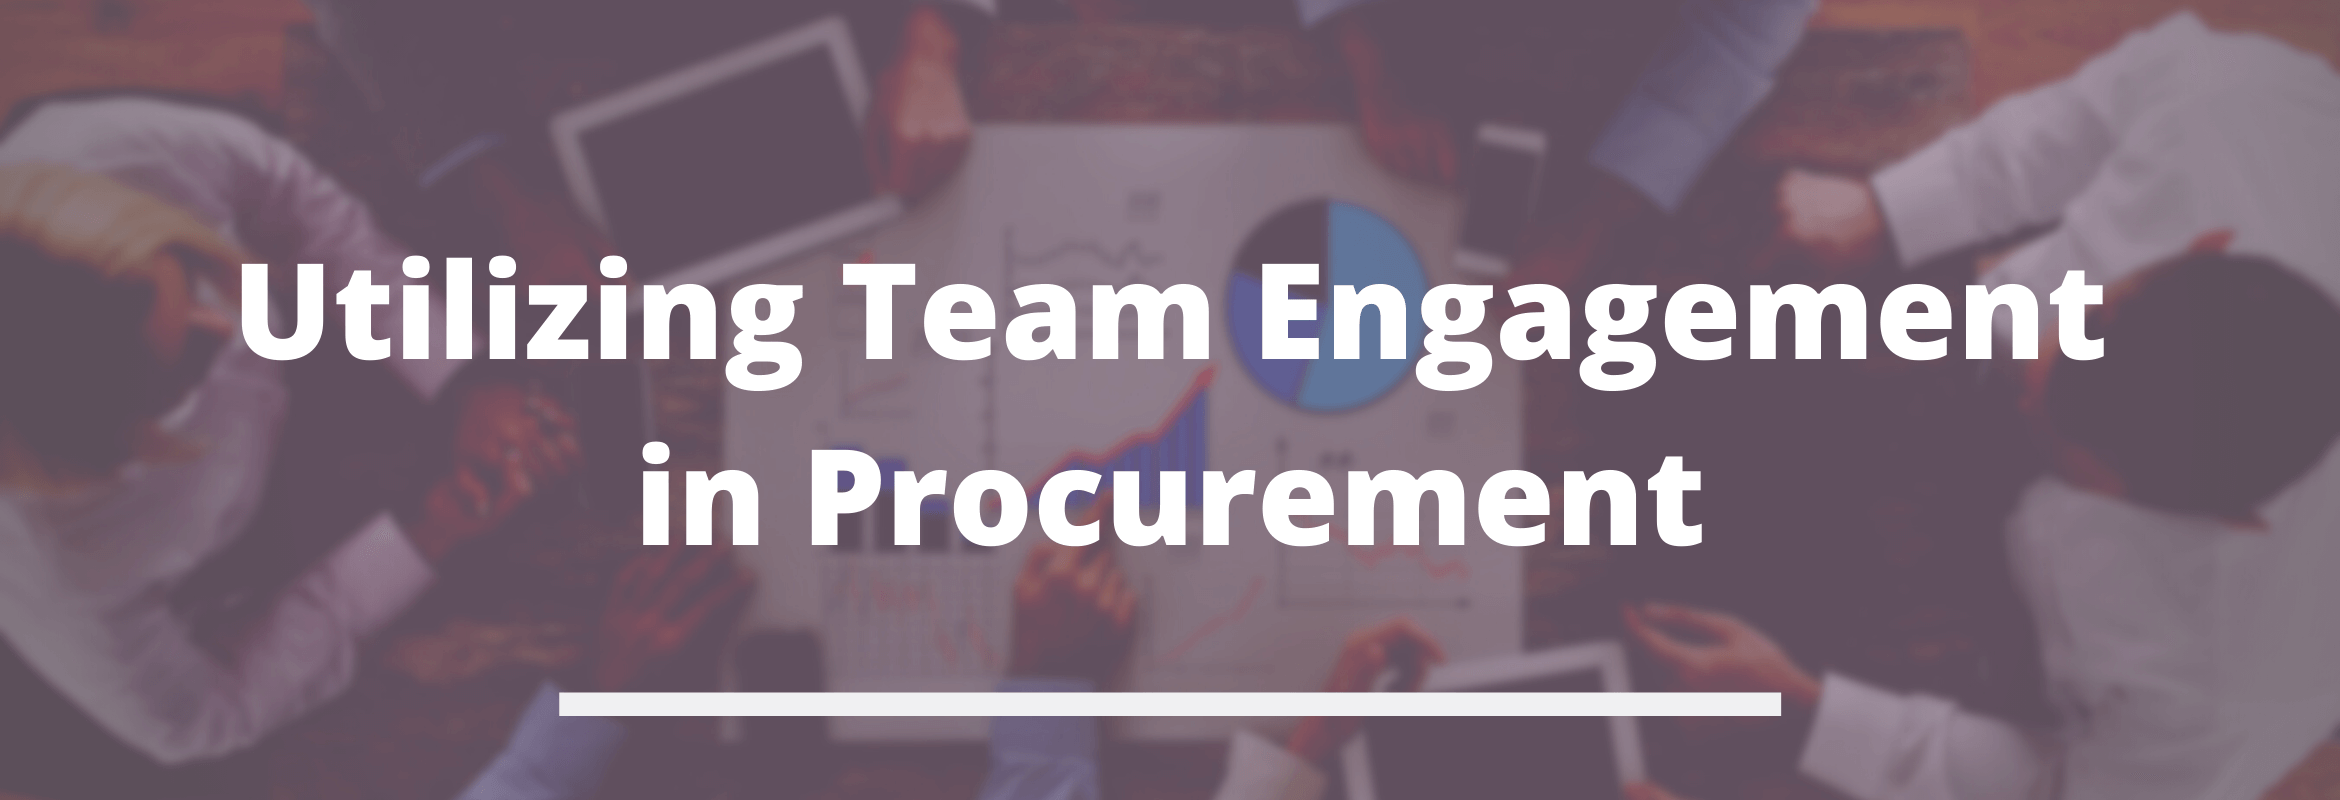 Image of Team Engagement